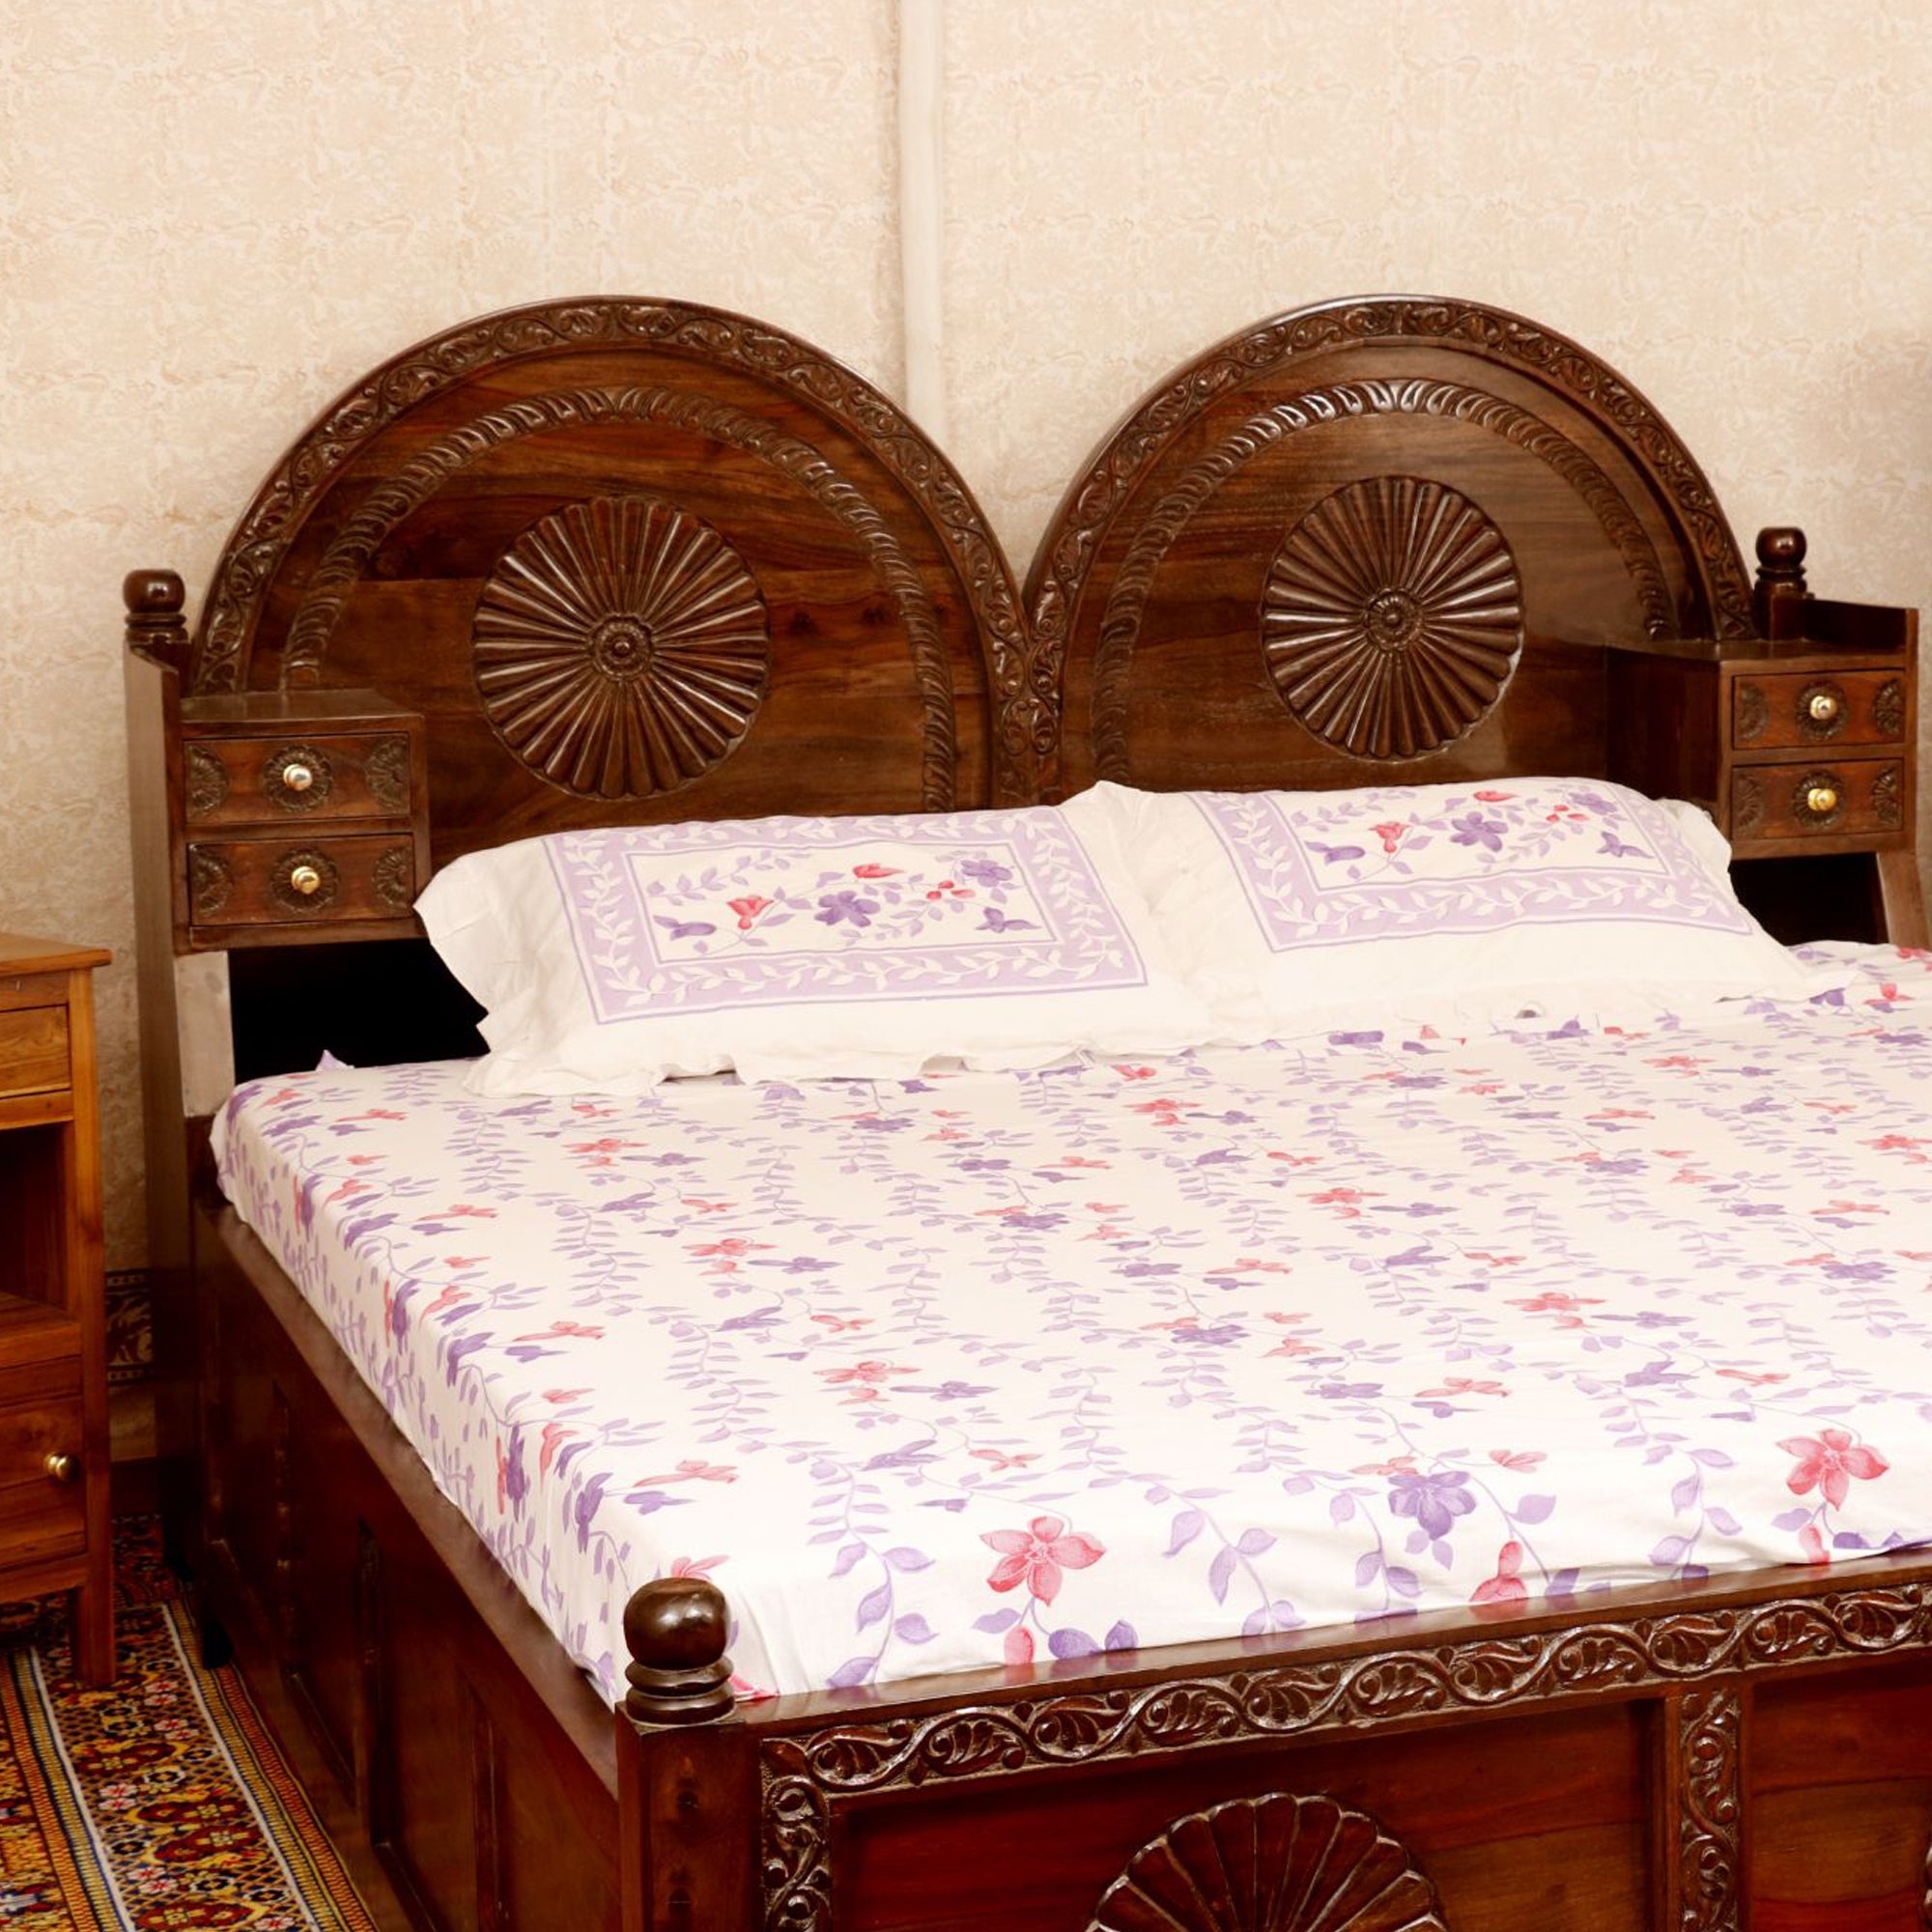 Sheesham Antique-Finish Bed With storage box Bed